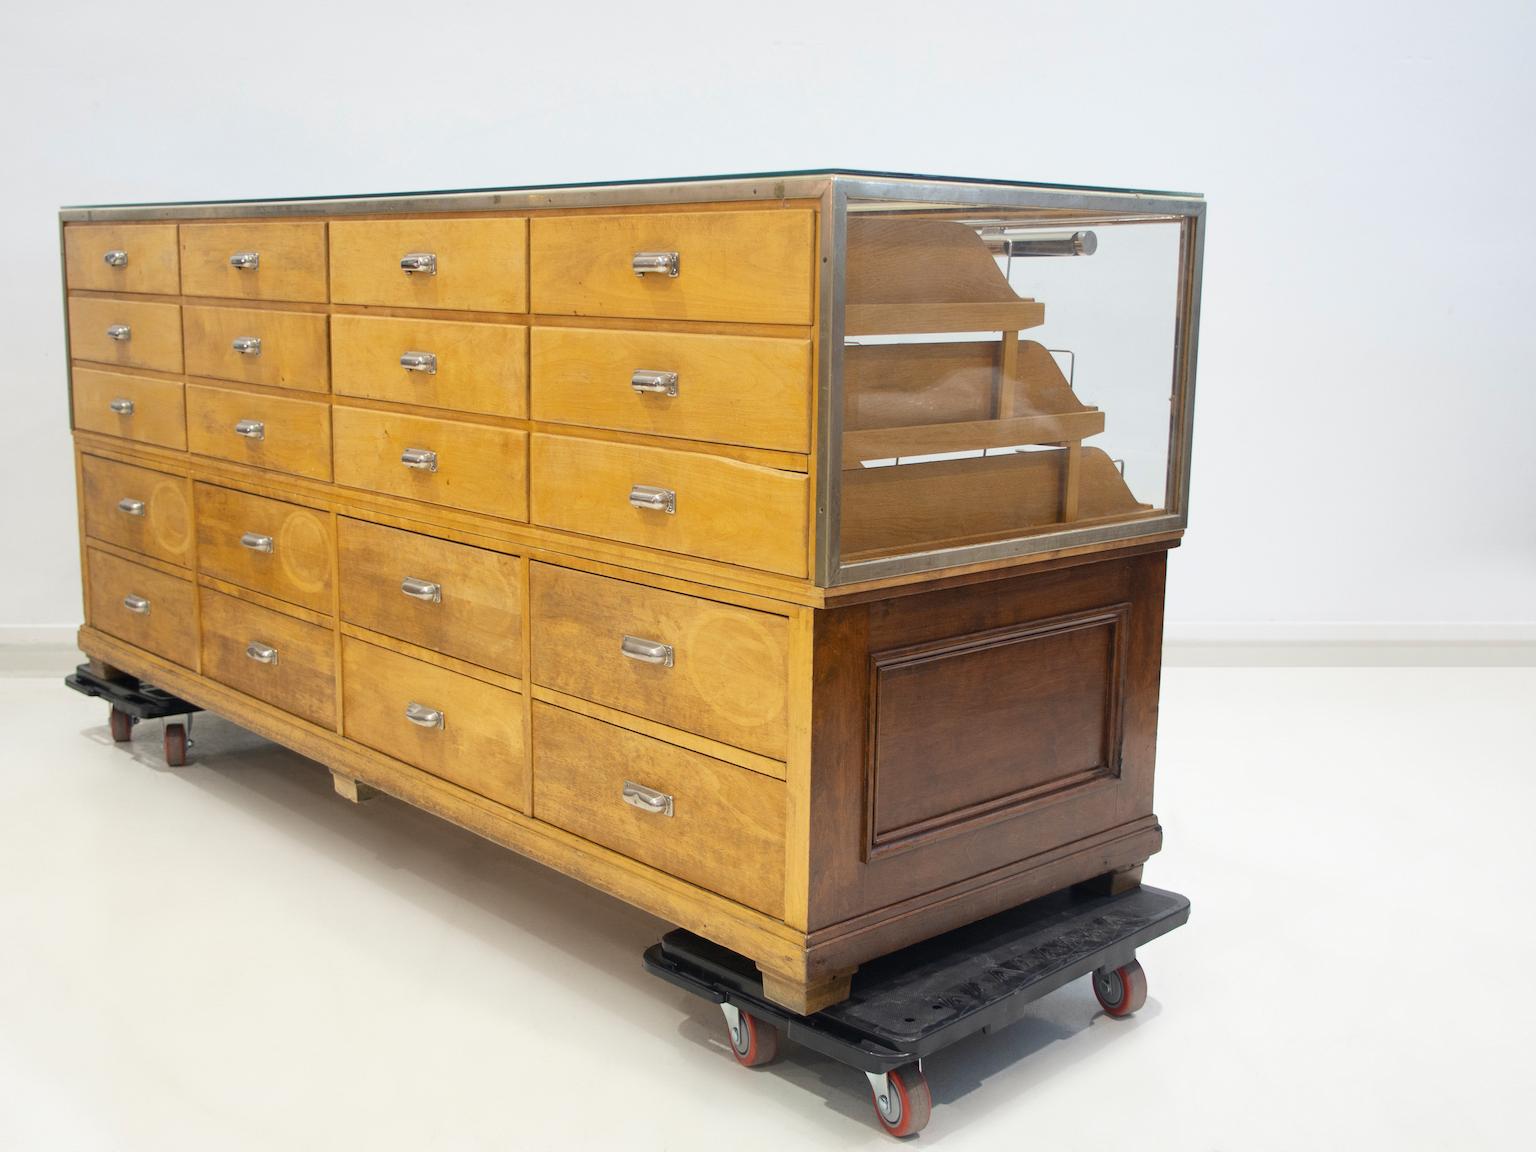 Shop Counter of Birch and Oak Wood with Twenty Drawers, 1940's For Sale 8